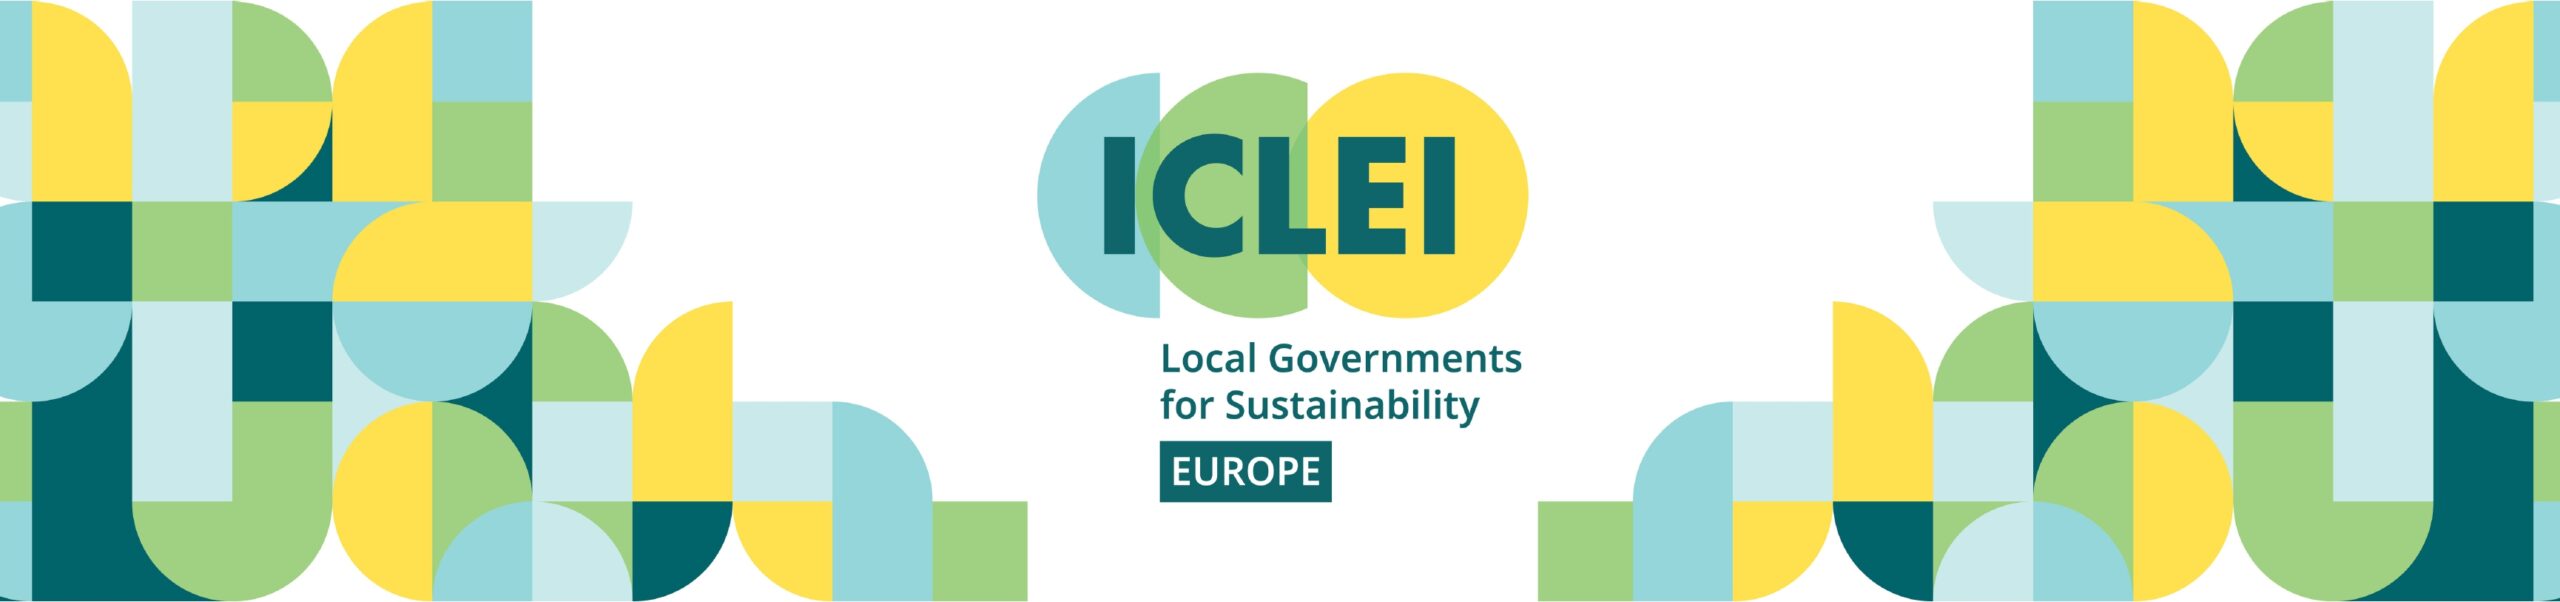 ICLEI: Global network of 2500+ local governments in 125+ countries dedicated to sustainable urban development. ICLEI Europe aids in EU Green Deal implementation for resilient, equitable communities.